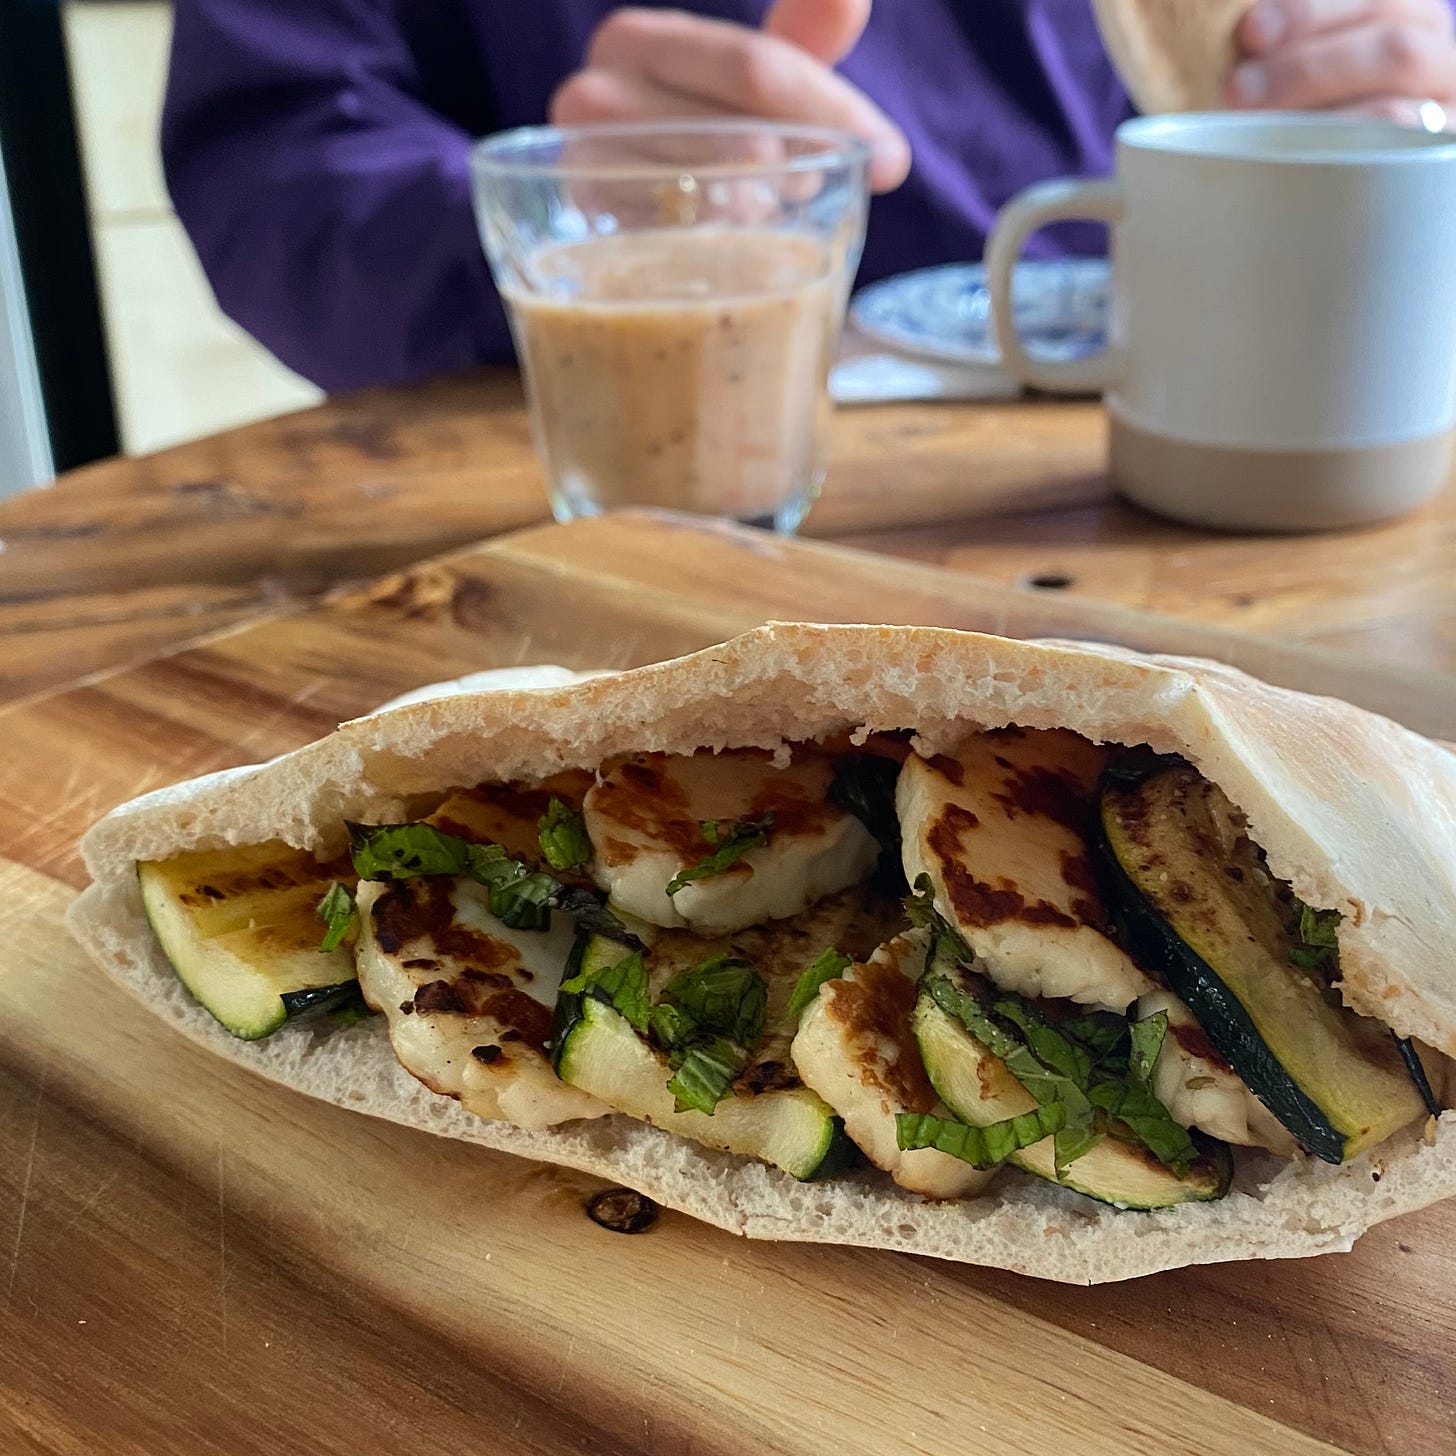 Open pitta pocket filled with halloumi, sliced courgette and chopped mint. Pitta is on a wooden board, a cup, glass and a figure in the background